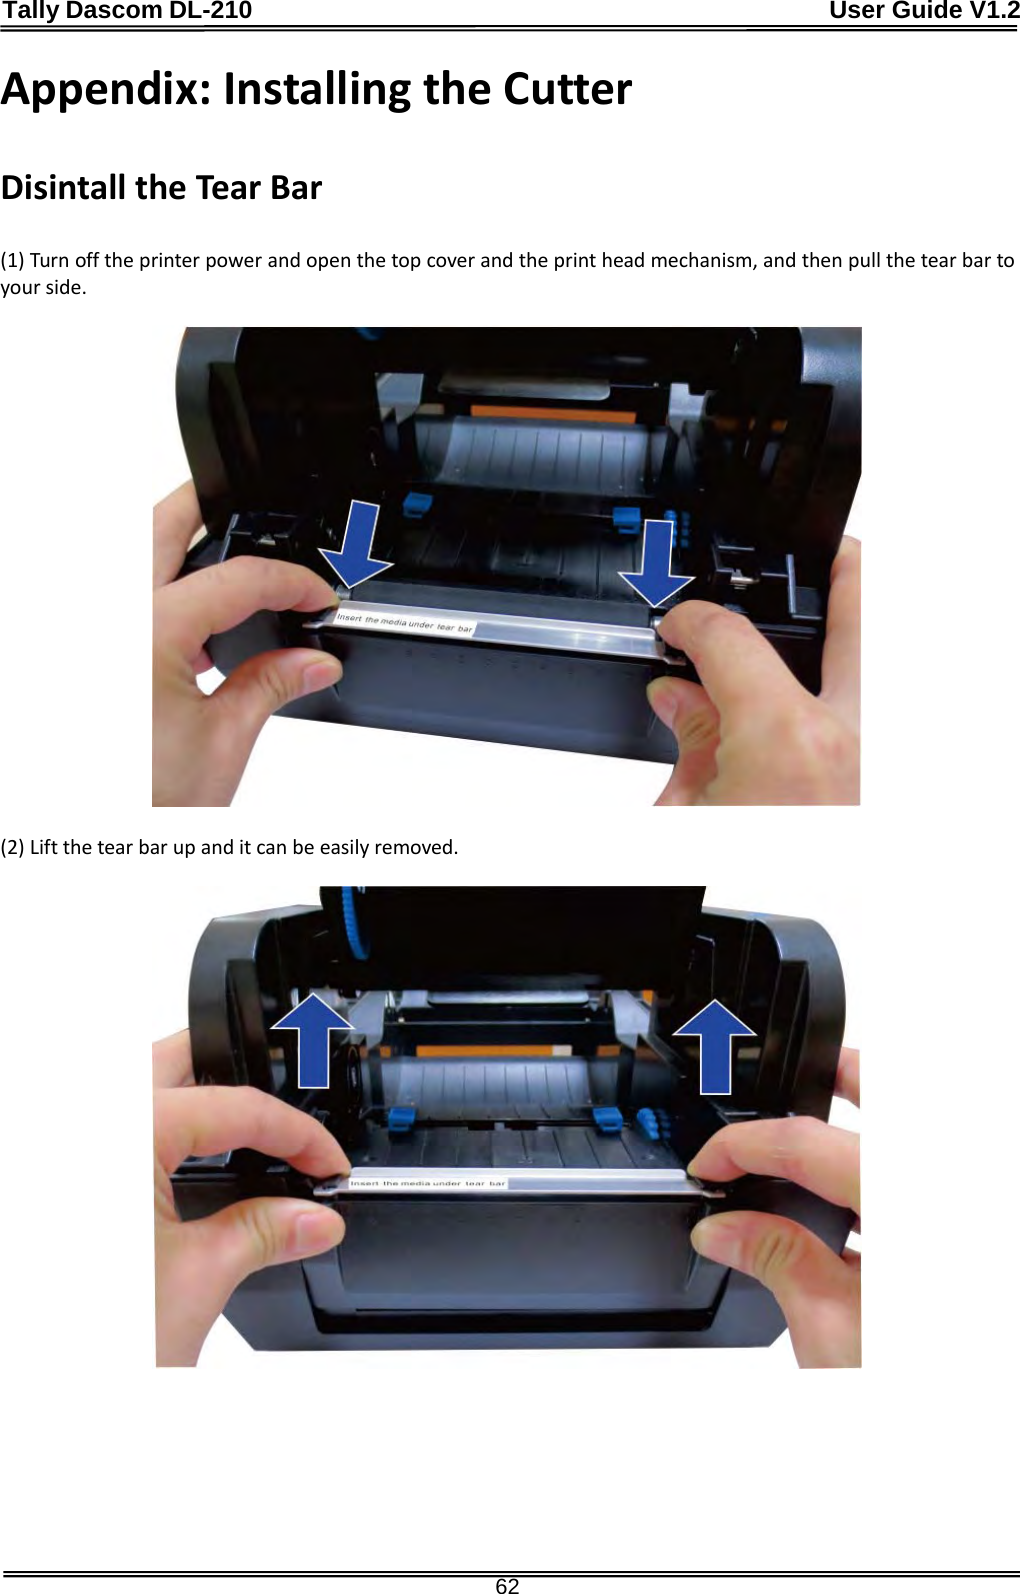 Tally Dascom DL-210                                              User Guide V1.2  62 Appendix: Installing the Cutter  Disintall the Tear Bar  (1) Turn off the printer power and open the top cover and the print head mechanism, and then pull the tear bar to your side.    (2) Lift the tear bar up and it can be easily removed.       